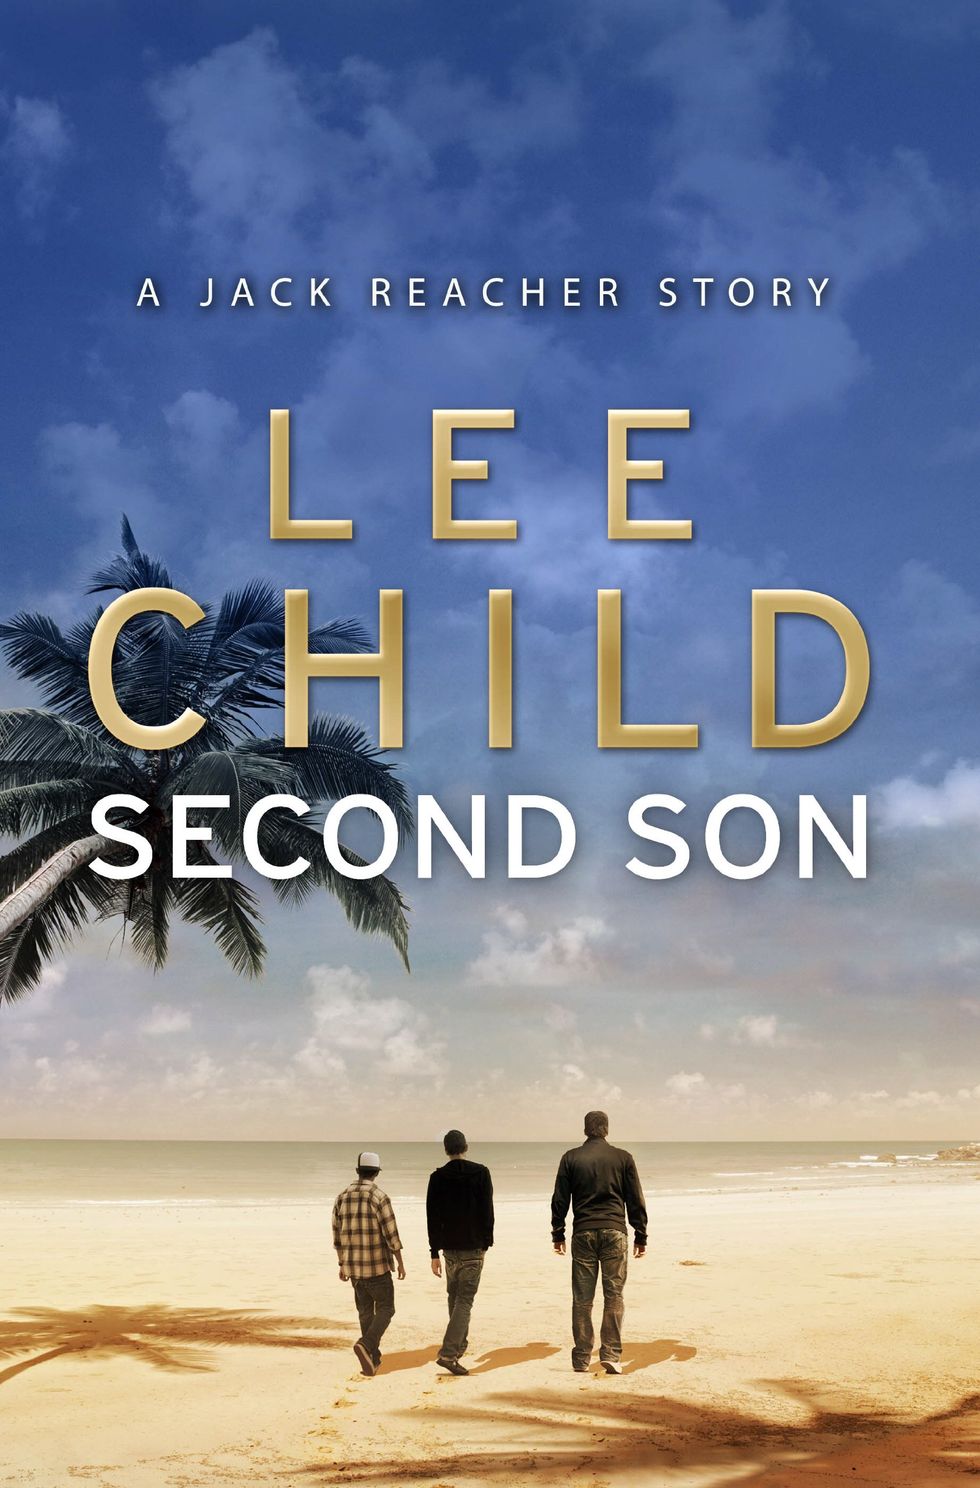 Second Son (short story, 2011)